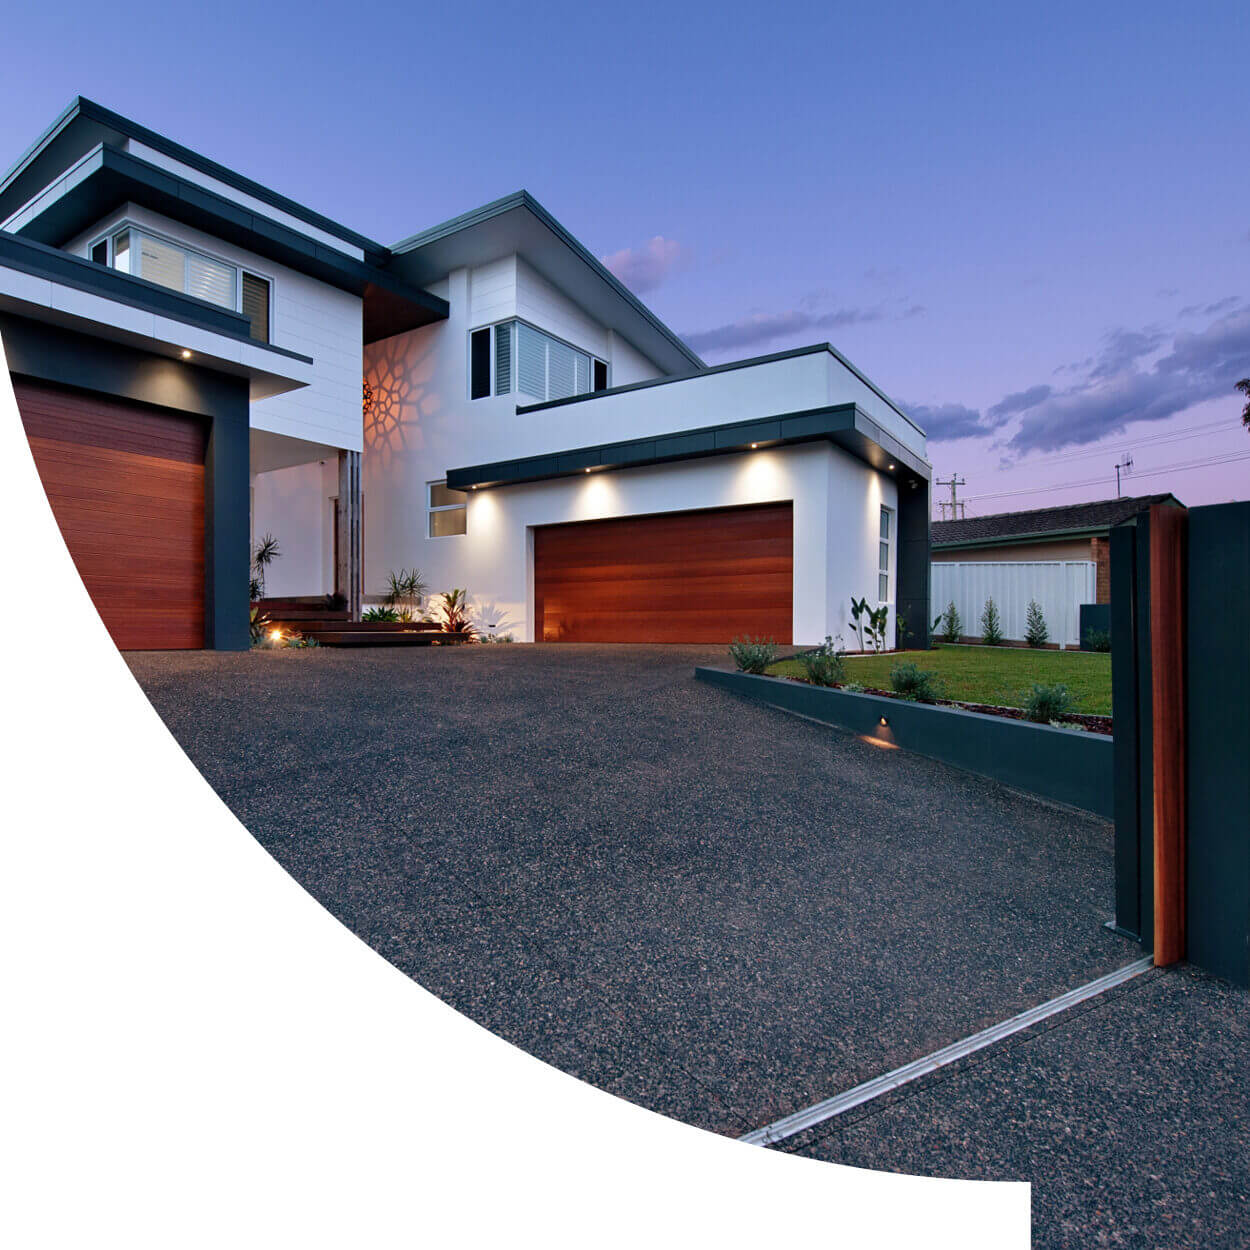 Modern two-story house in Nelson Bay at dusk, featuring a white exterior with wooden accents, a large garage door, and a well-lit driveway leading to a gate. The sky is vibrant with a